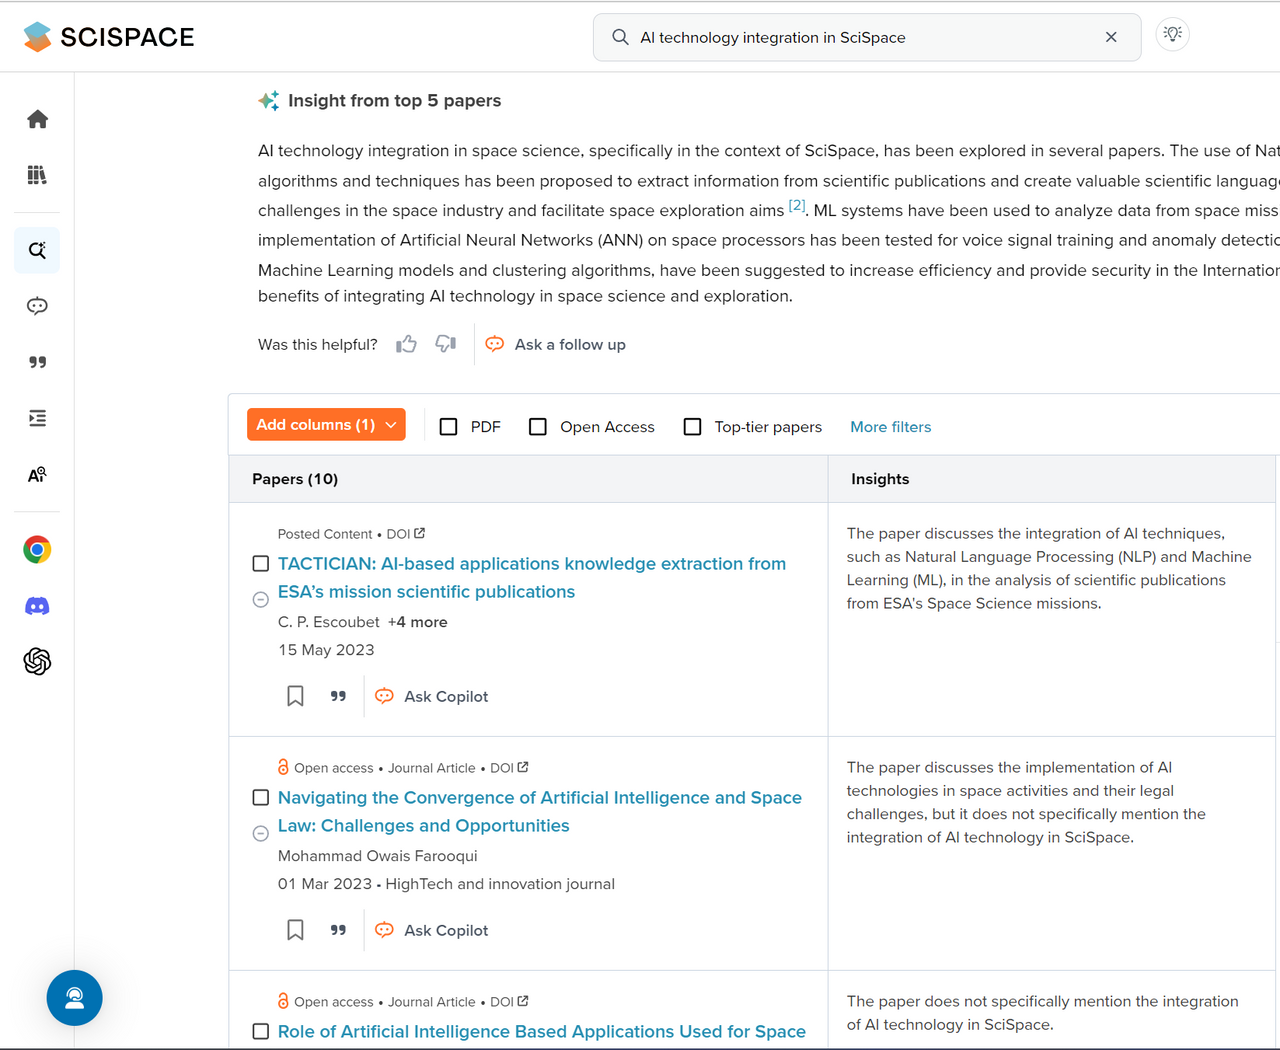 Screenshot of SciSpace Main Page - Gateway to Cutting-Edge Science and Technology Insights.